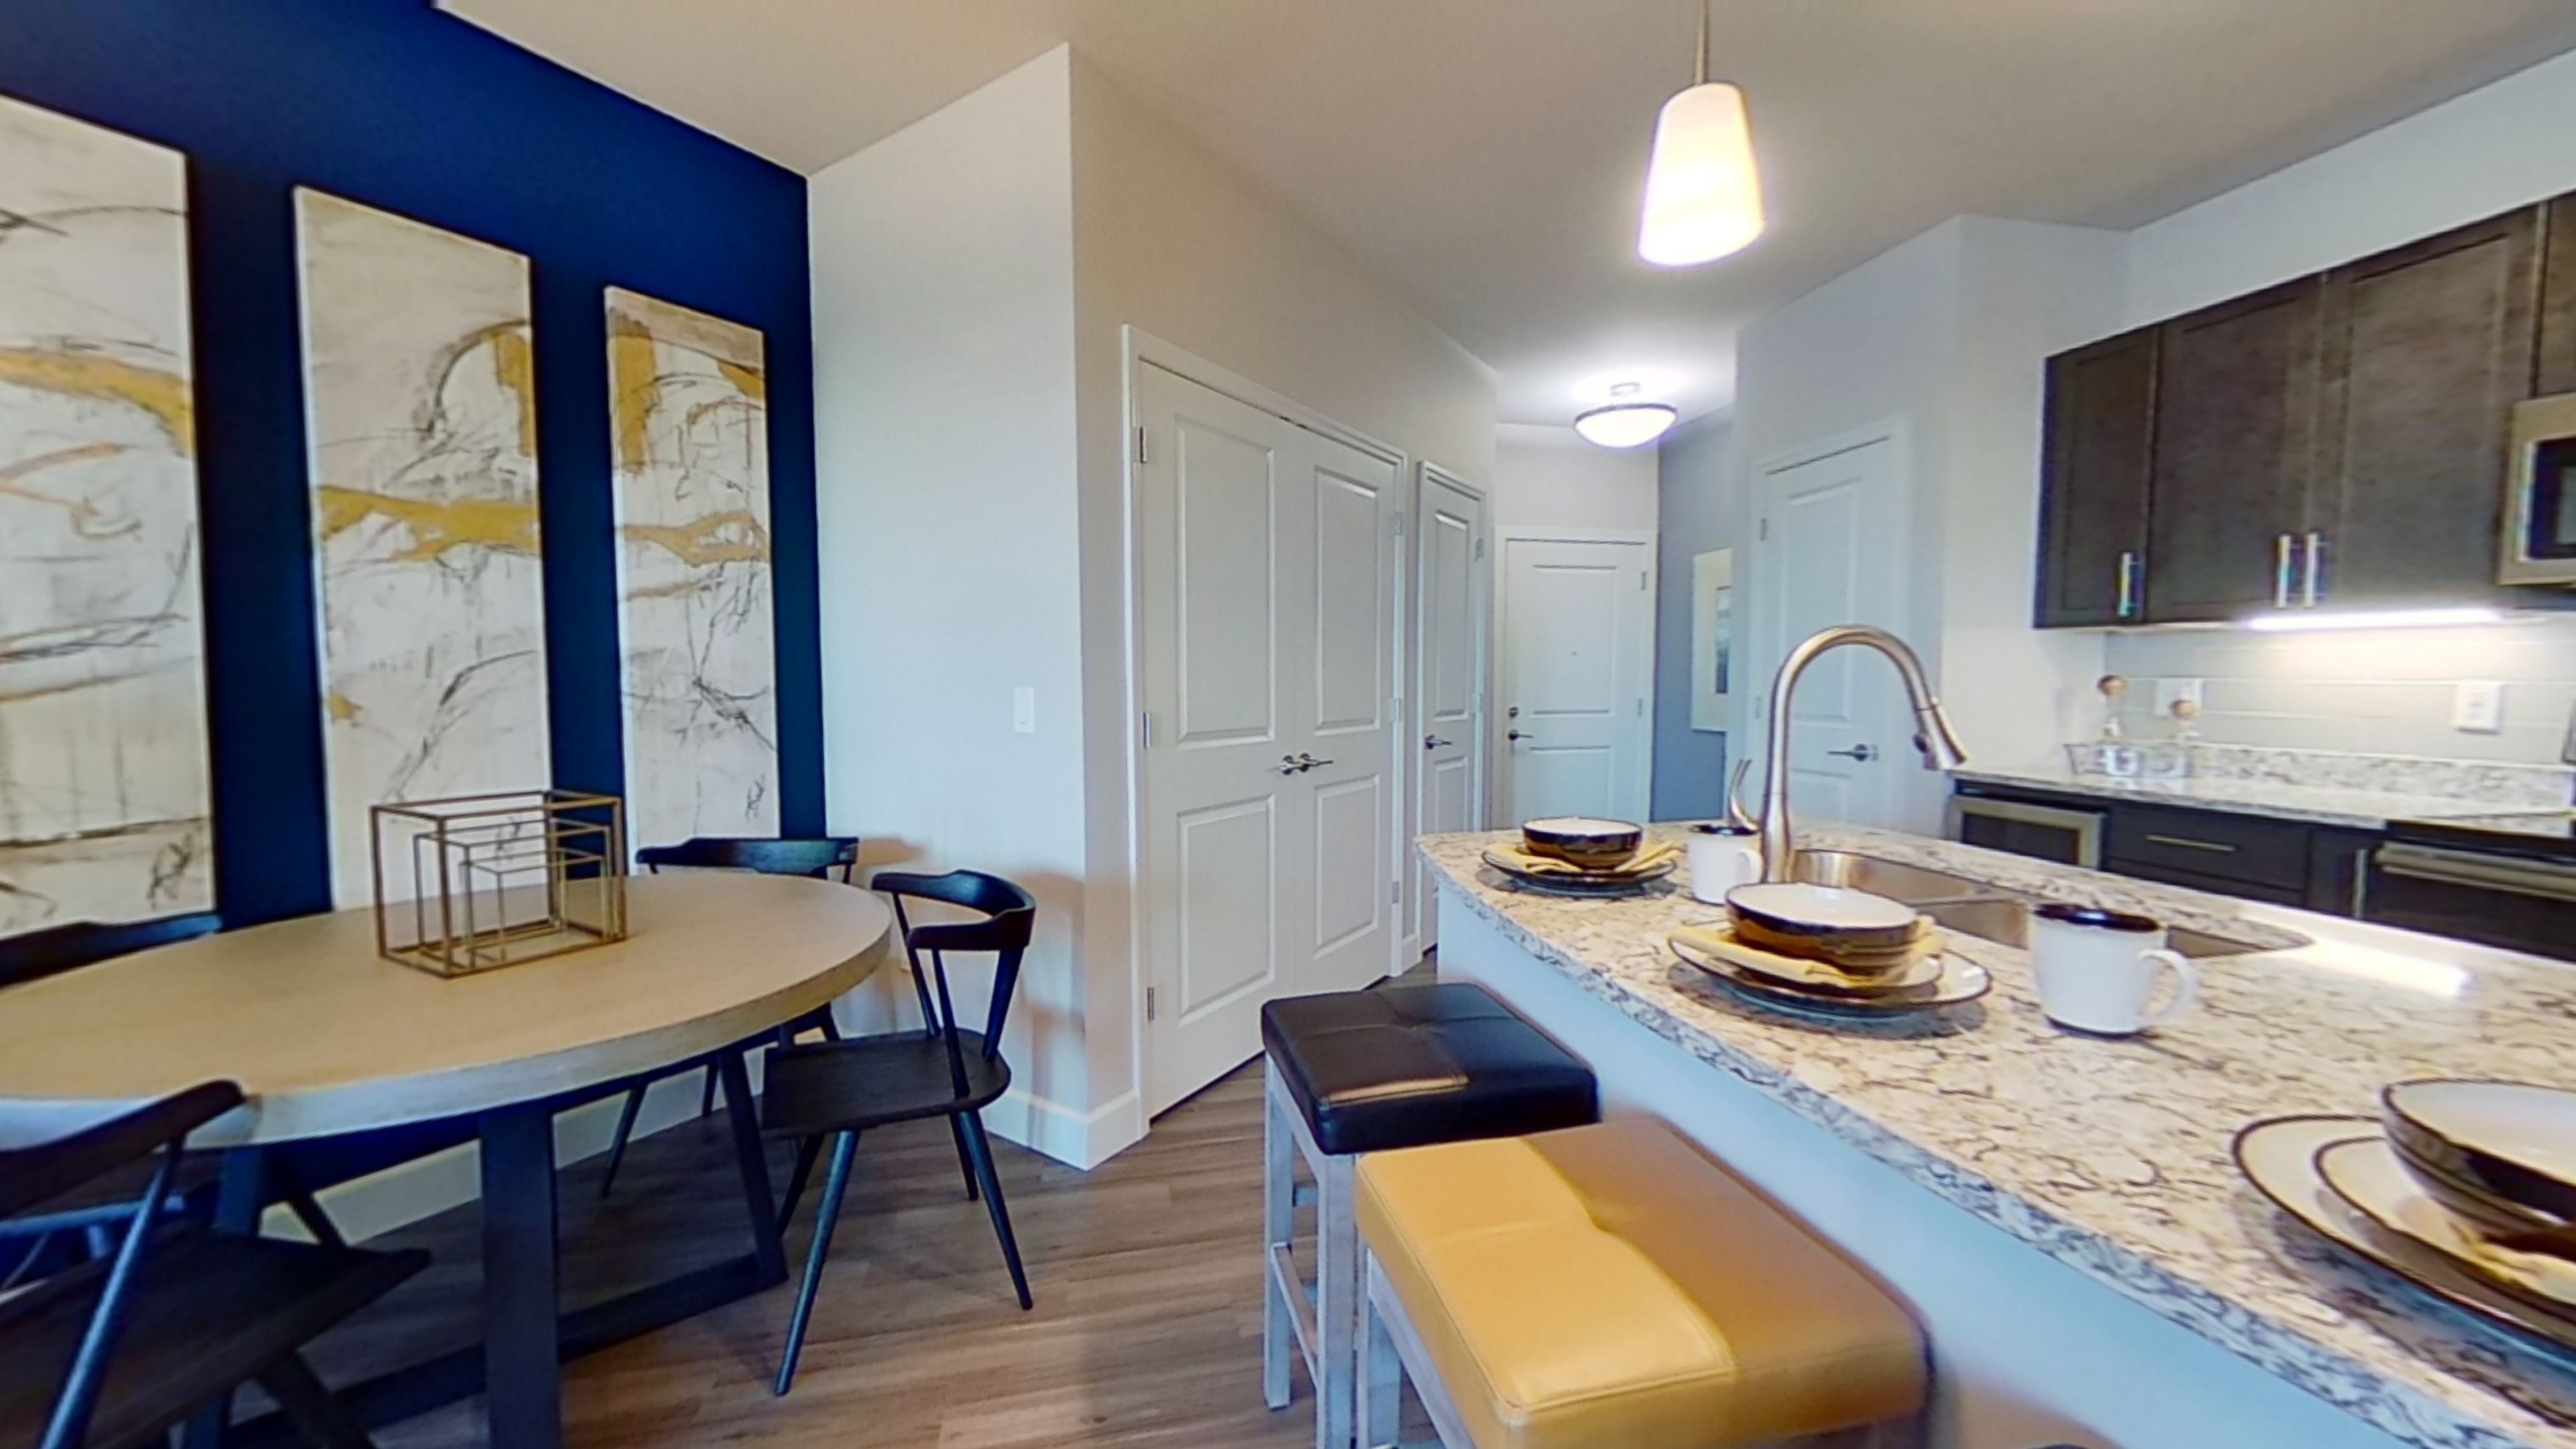 A3 Unit Kitchen and Dining Area at the Vue at Creve Coeur Apartments in Creve Coeur, MO